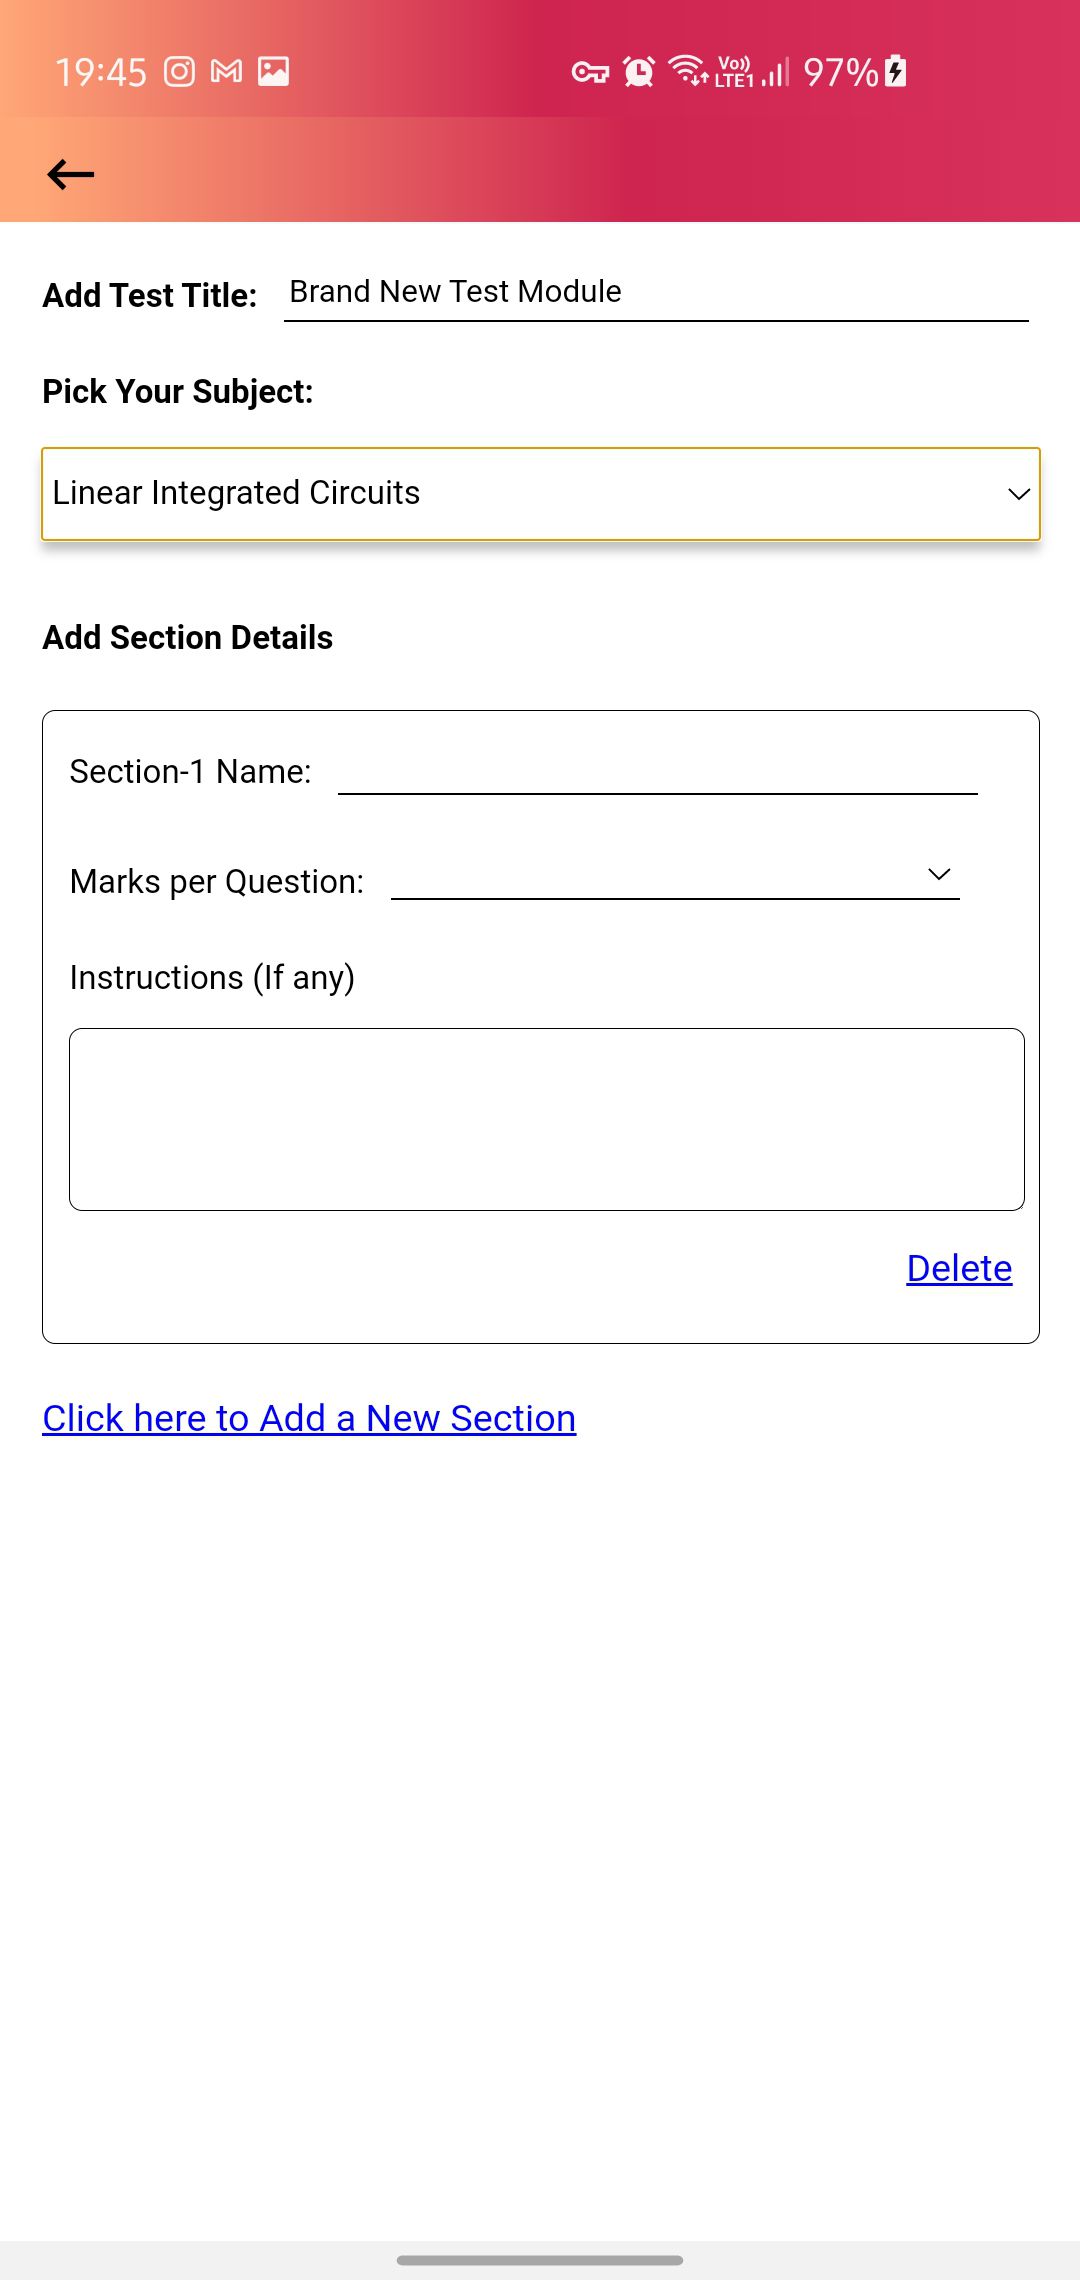 Once the Subject is selected, you will be prompted add “Section •